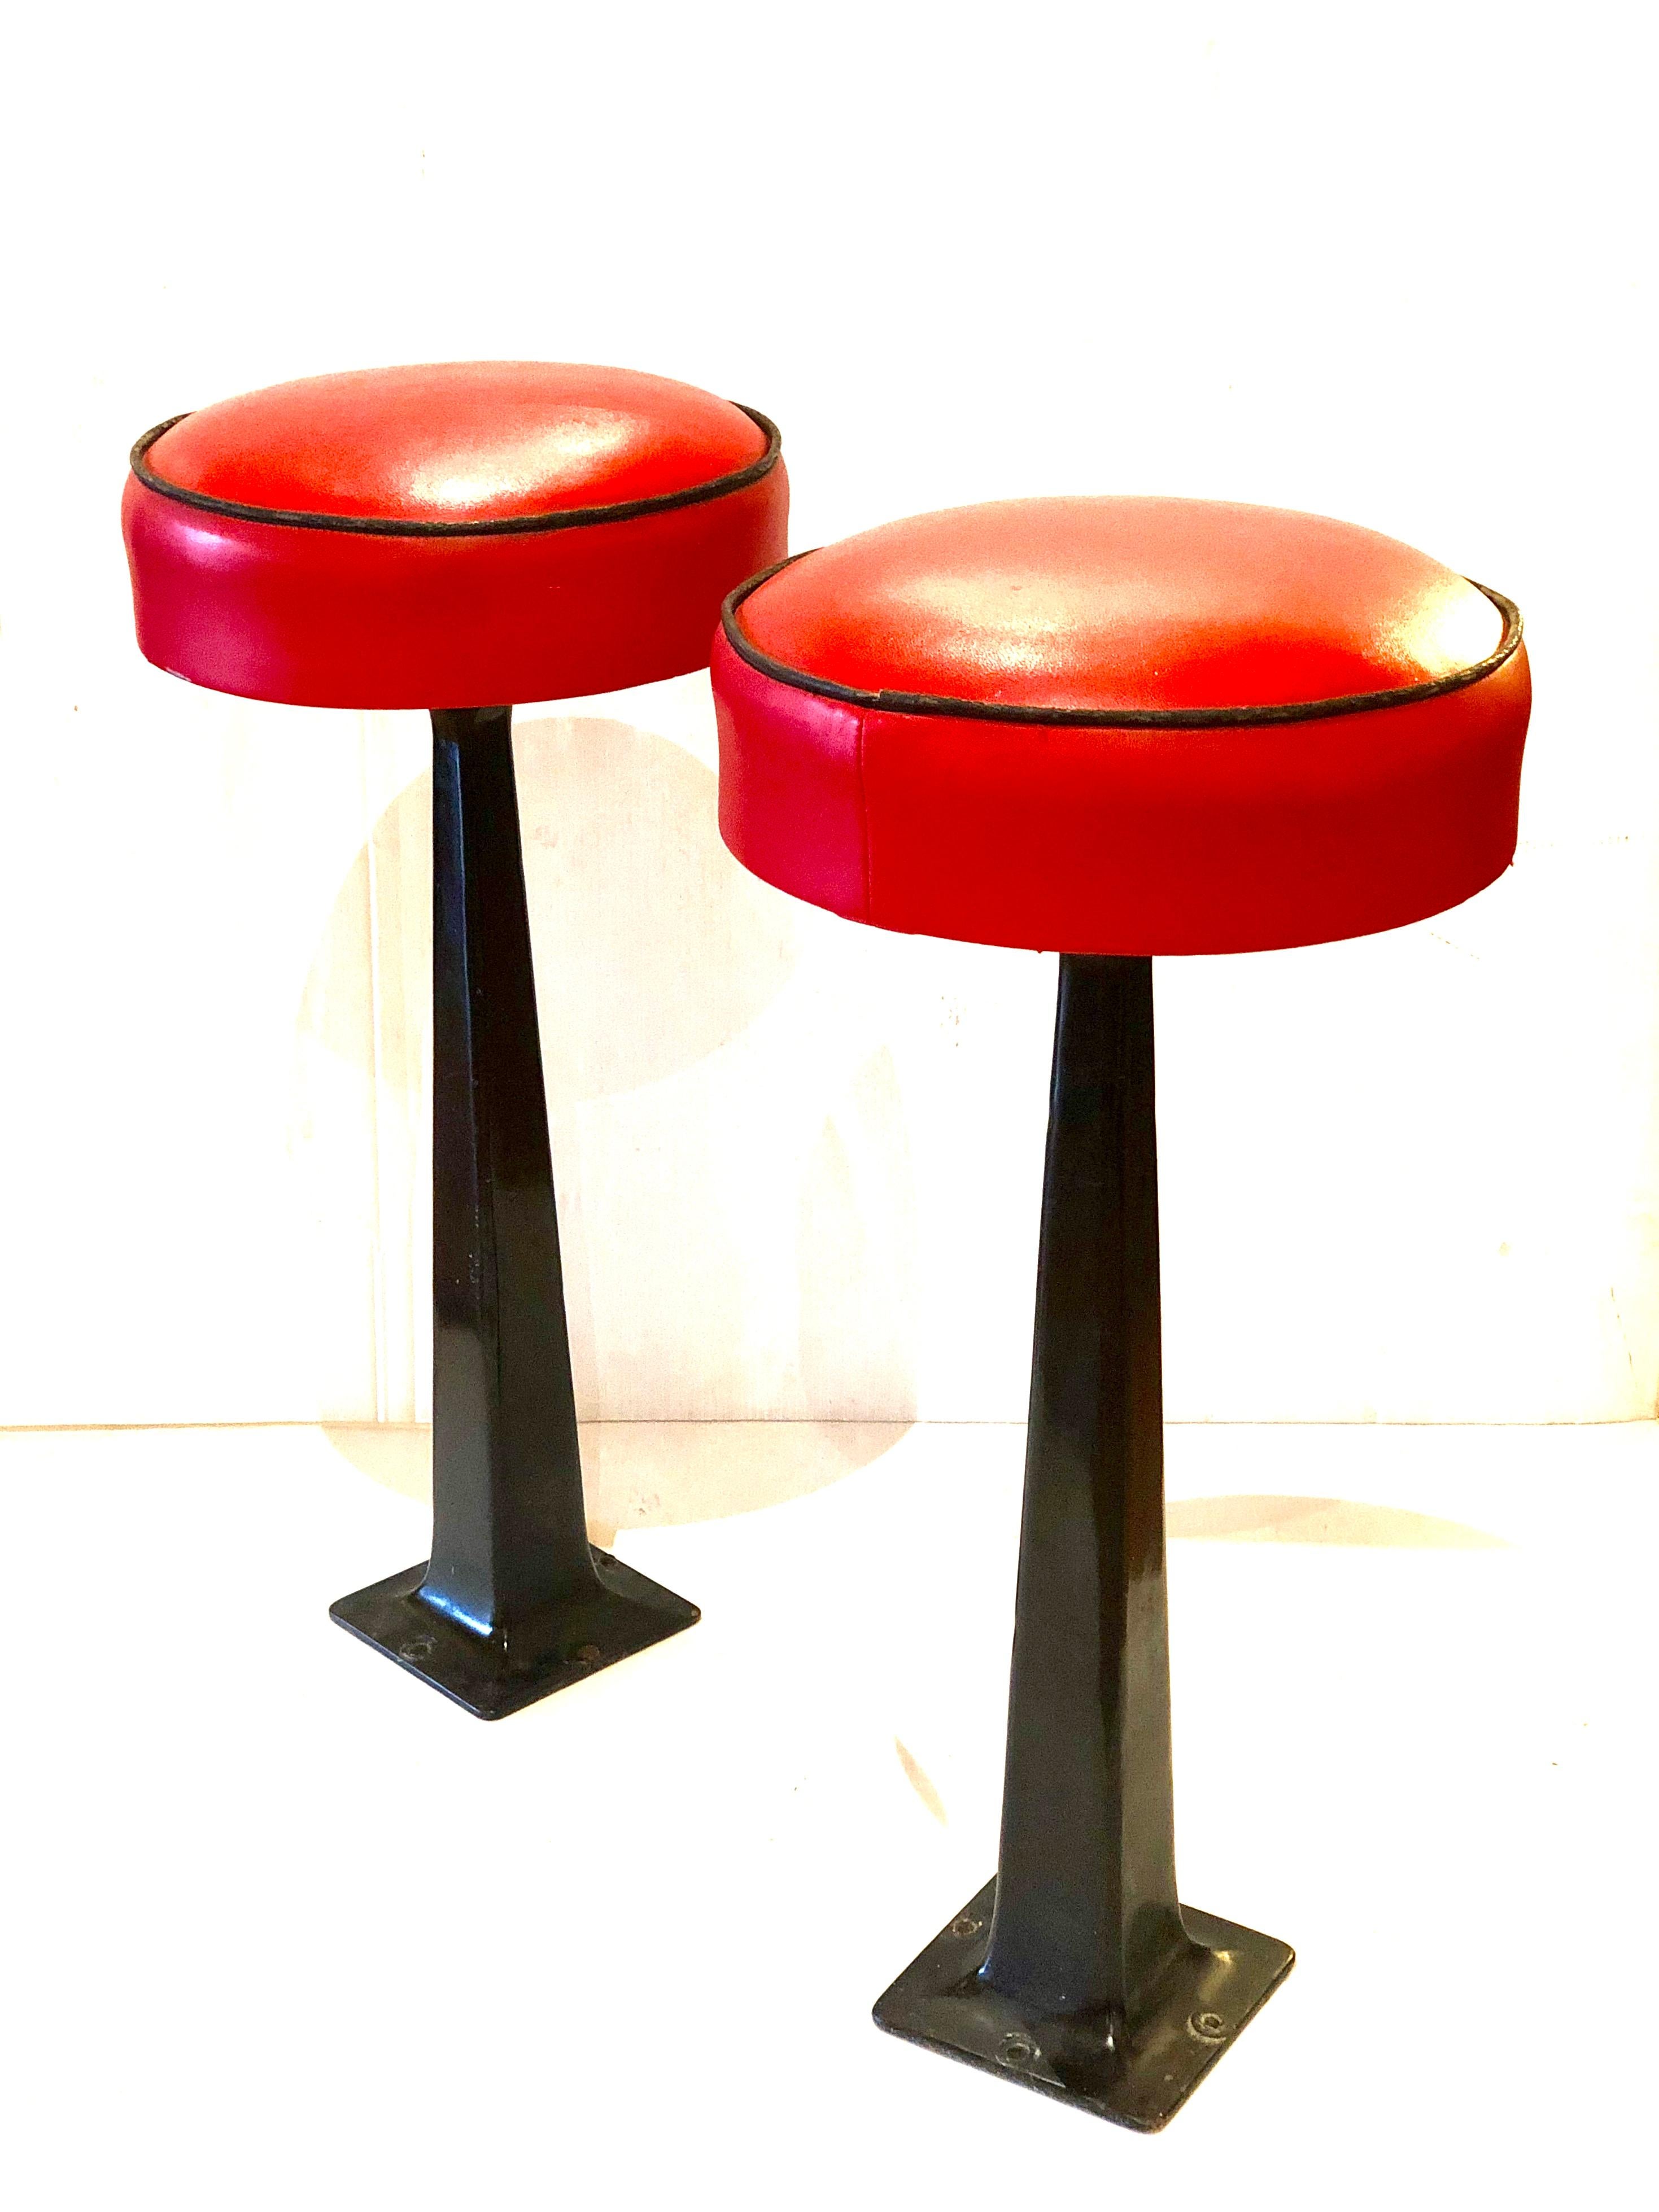 Nice pair of American midcentury swivel stools, Classic dinner stools with original Naugahyde in red with black pipping and solid steel base, they need to be bolder to the ground in very nice original condition.